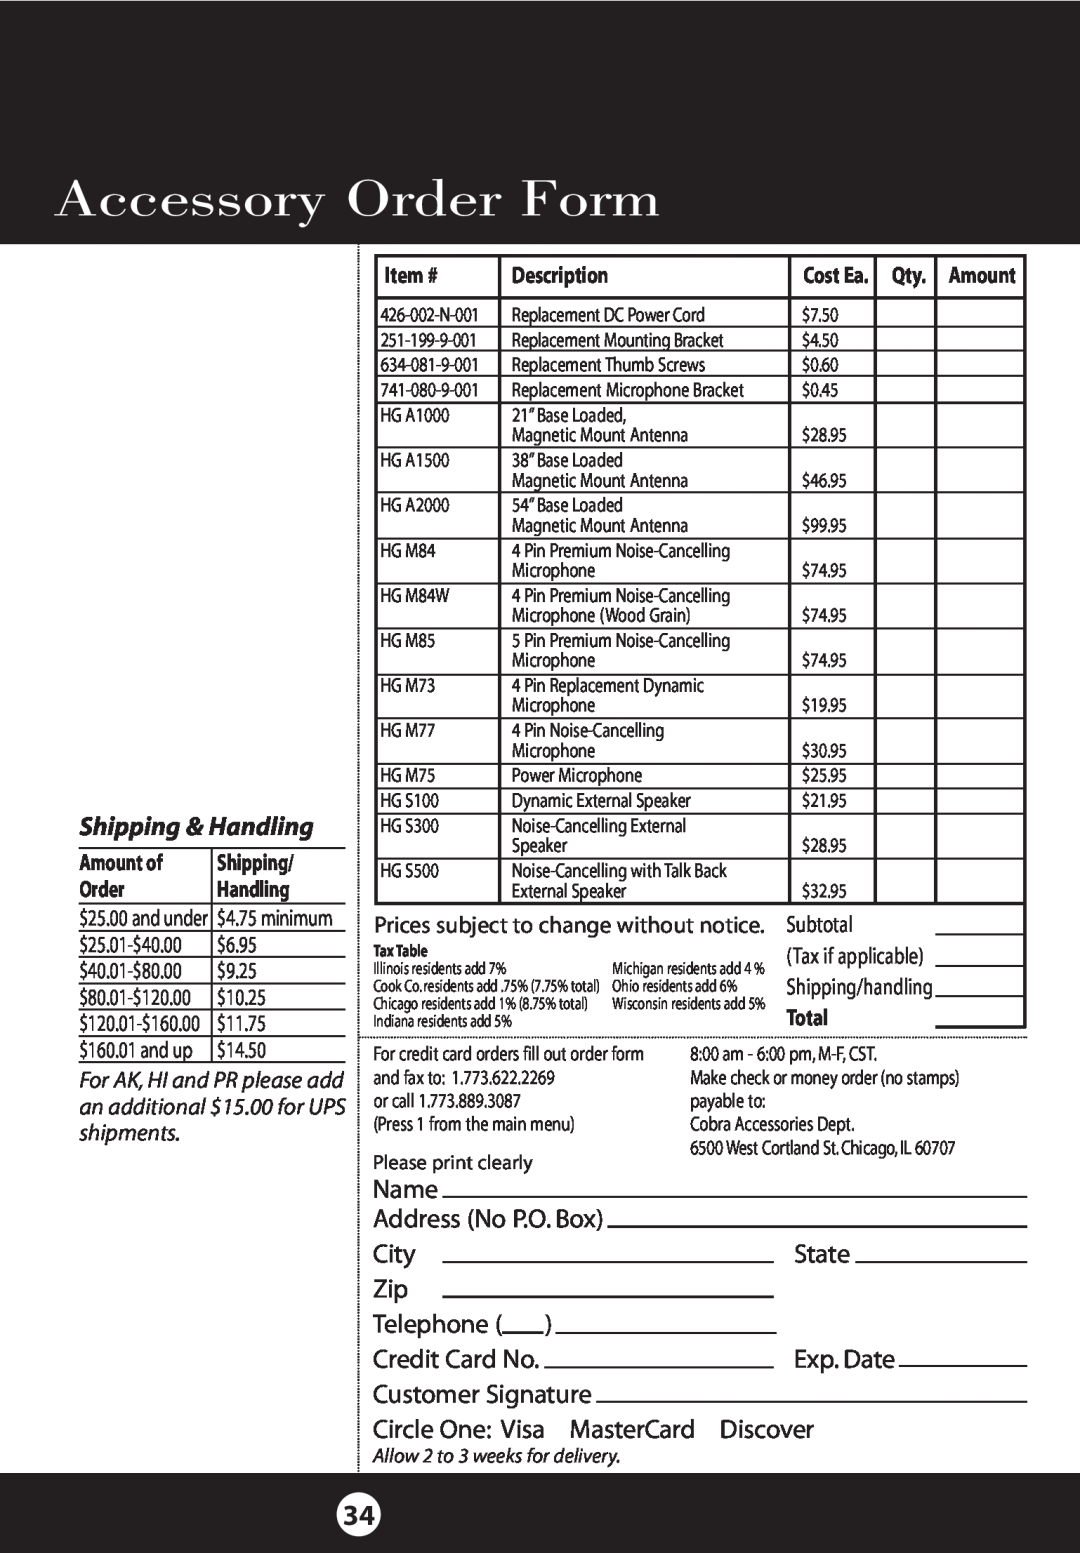 Cobra Electronics 25 NW specifications Accessory Order Form, Shipping & Handling 